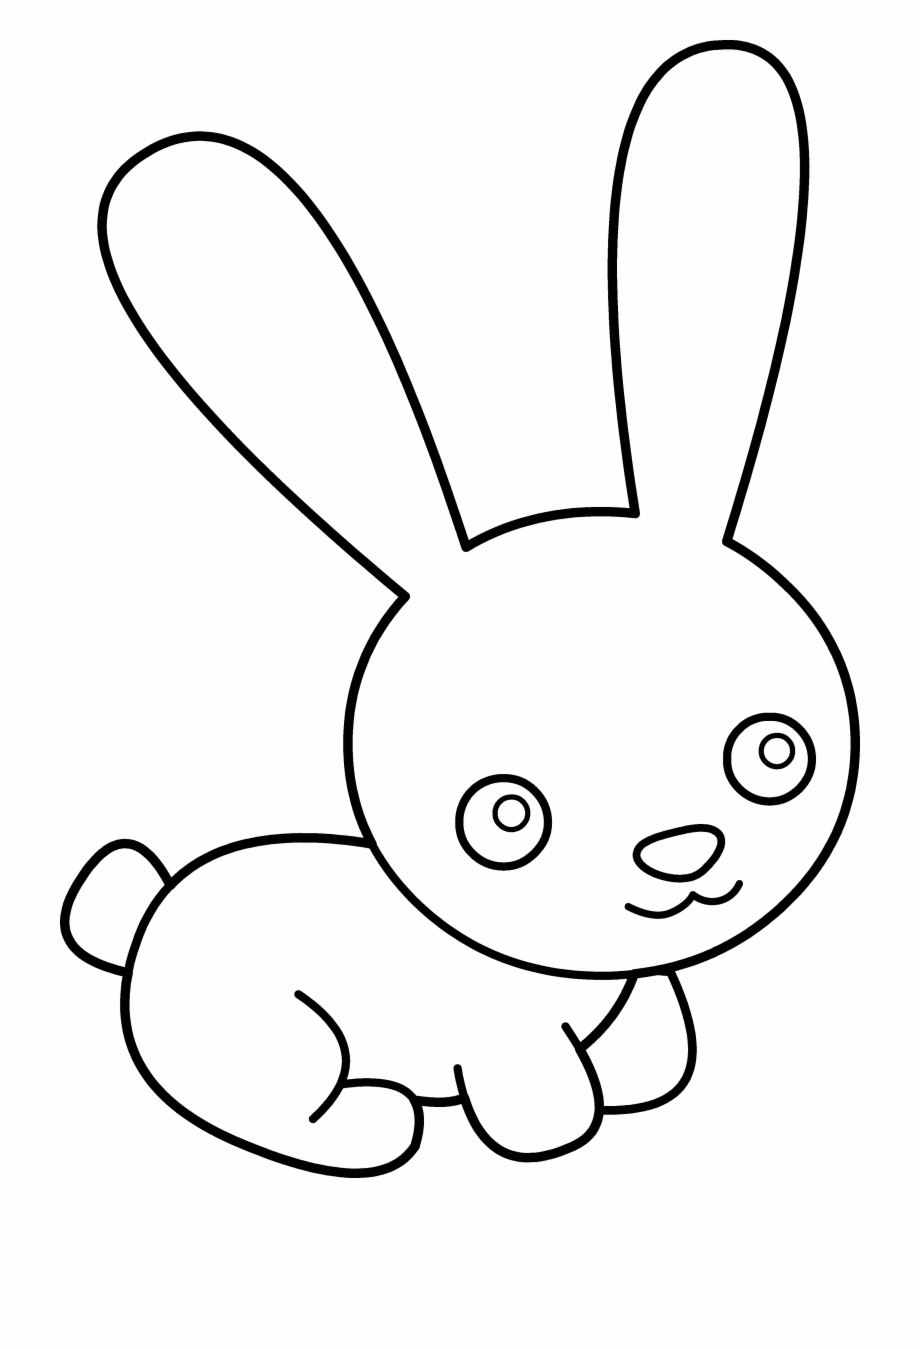 Bunnies clipart black and white, Bunnies black and white Transparent ...